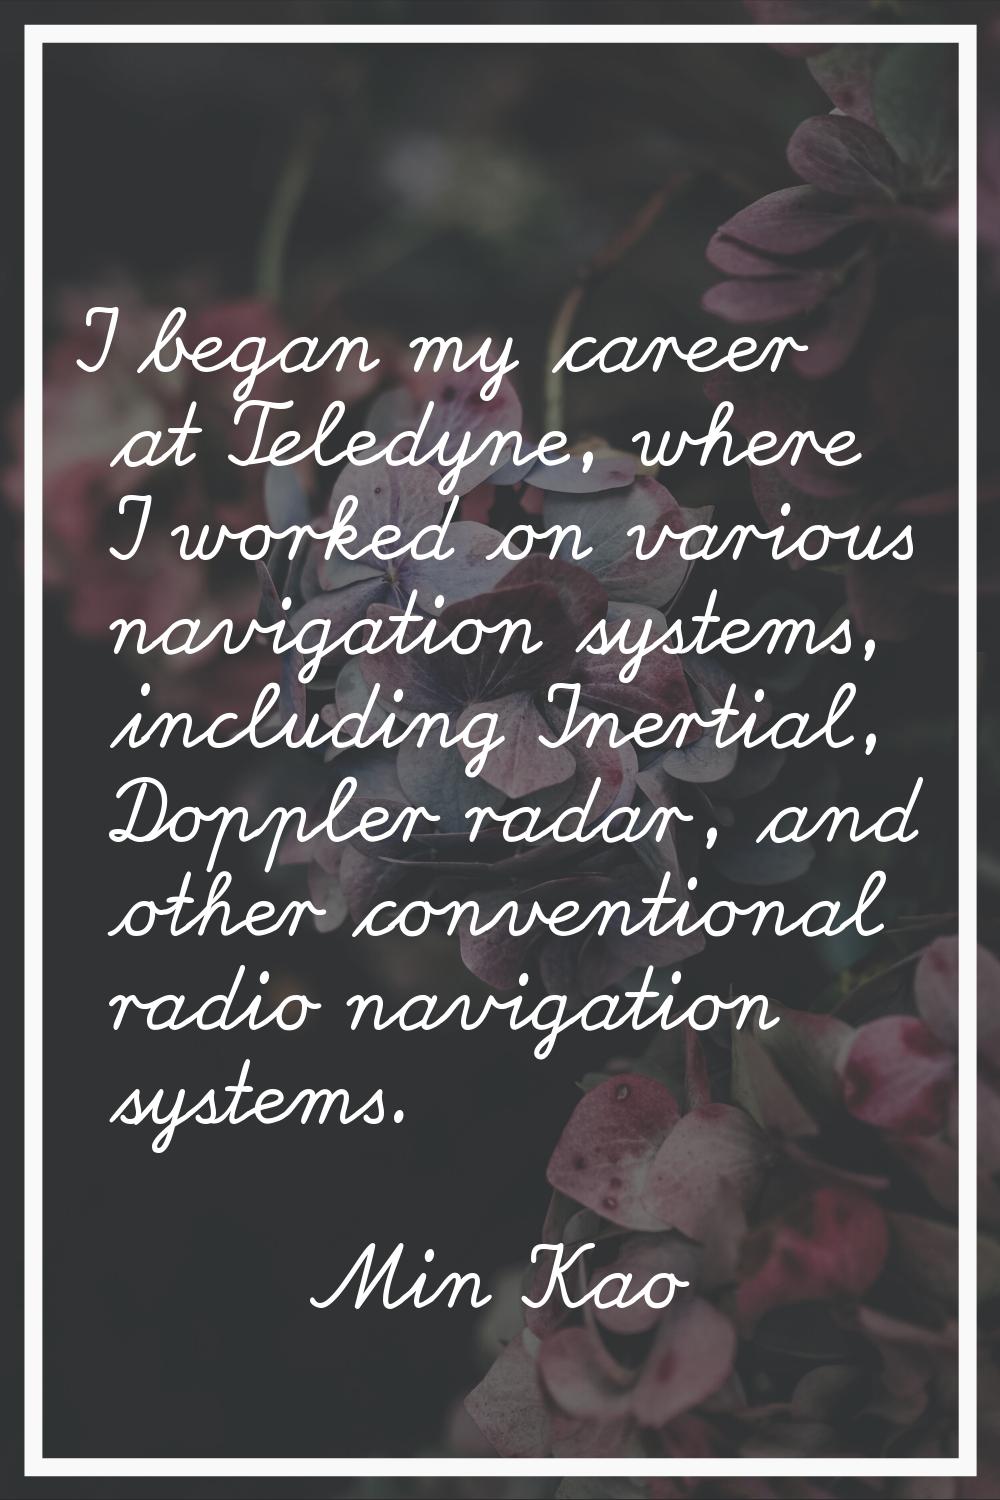 I began my career at Teledyne, where I worked on various navigation systems, including Inertial, Do